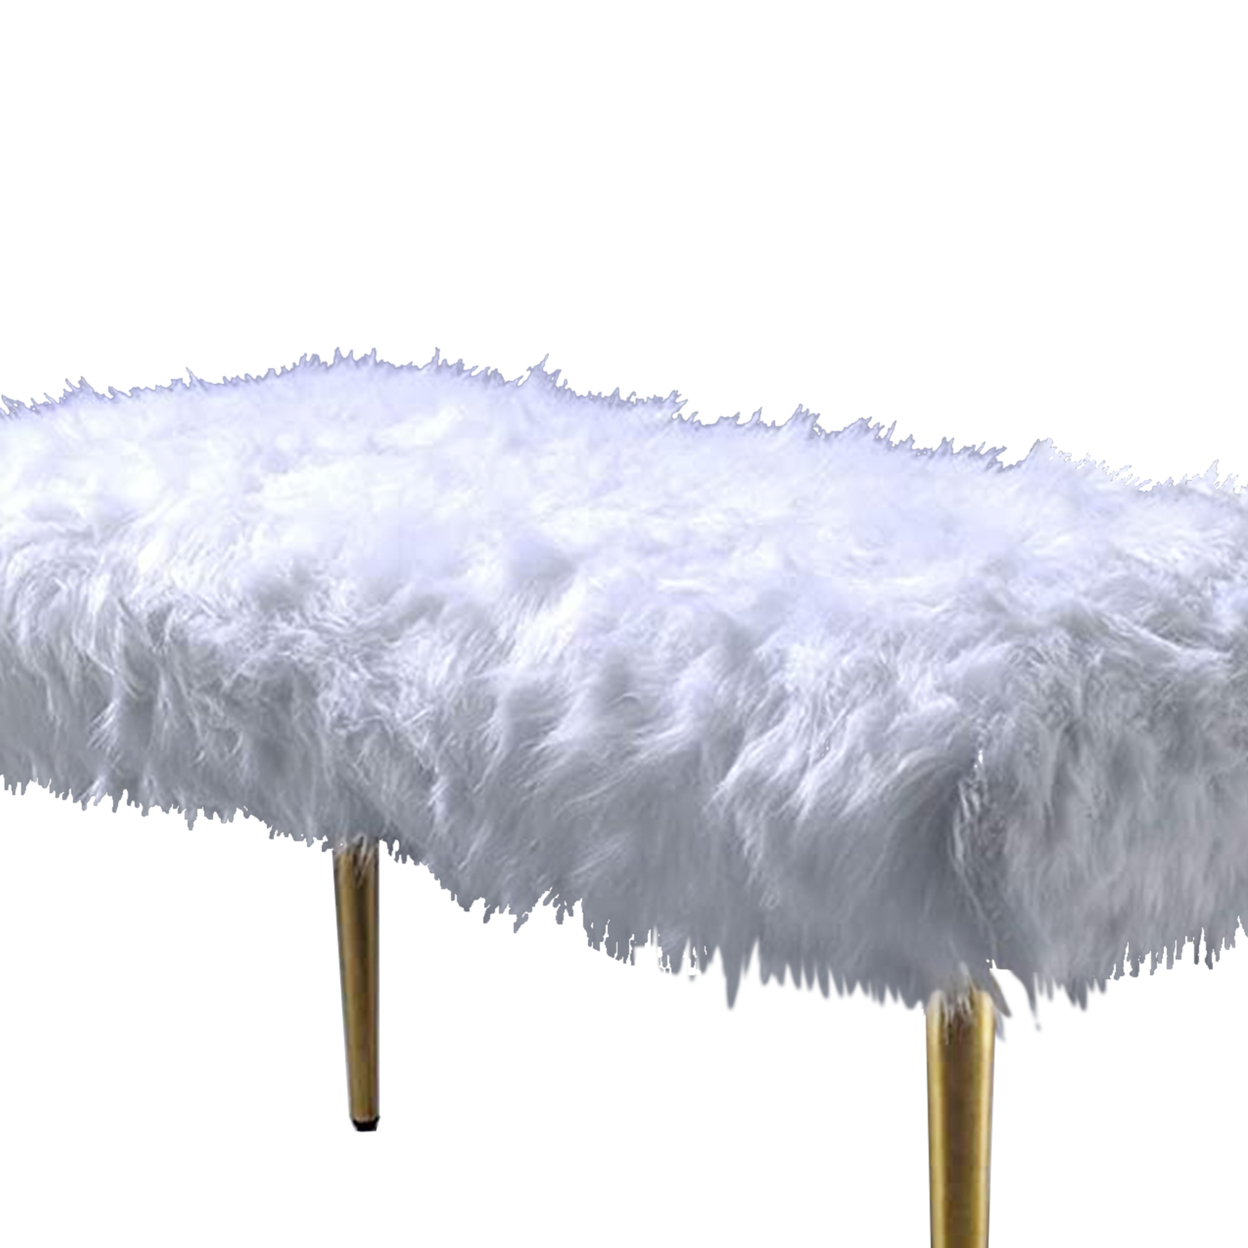 Modern Style Faux Fur Upholstered Metal Bench With Tapered Legs, White And Gold- Saltoro Sherpi